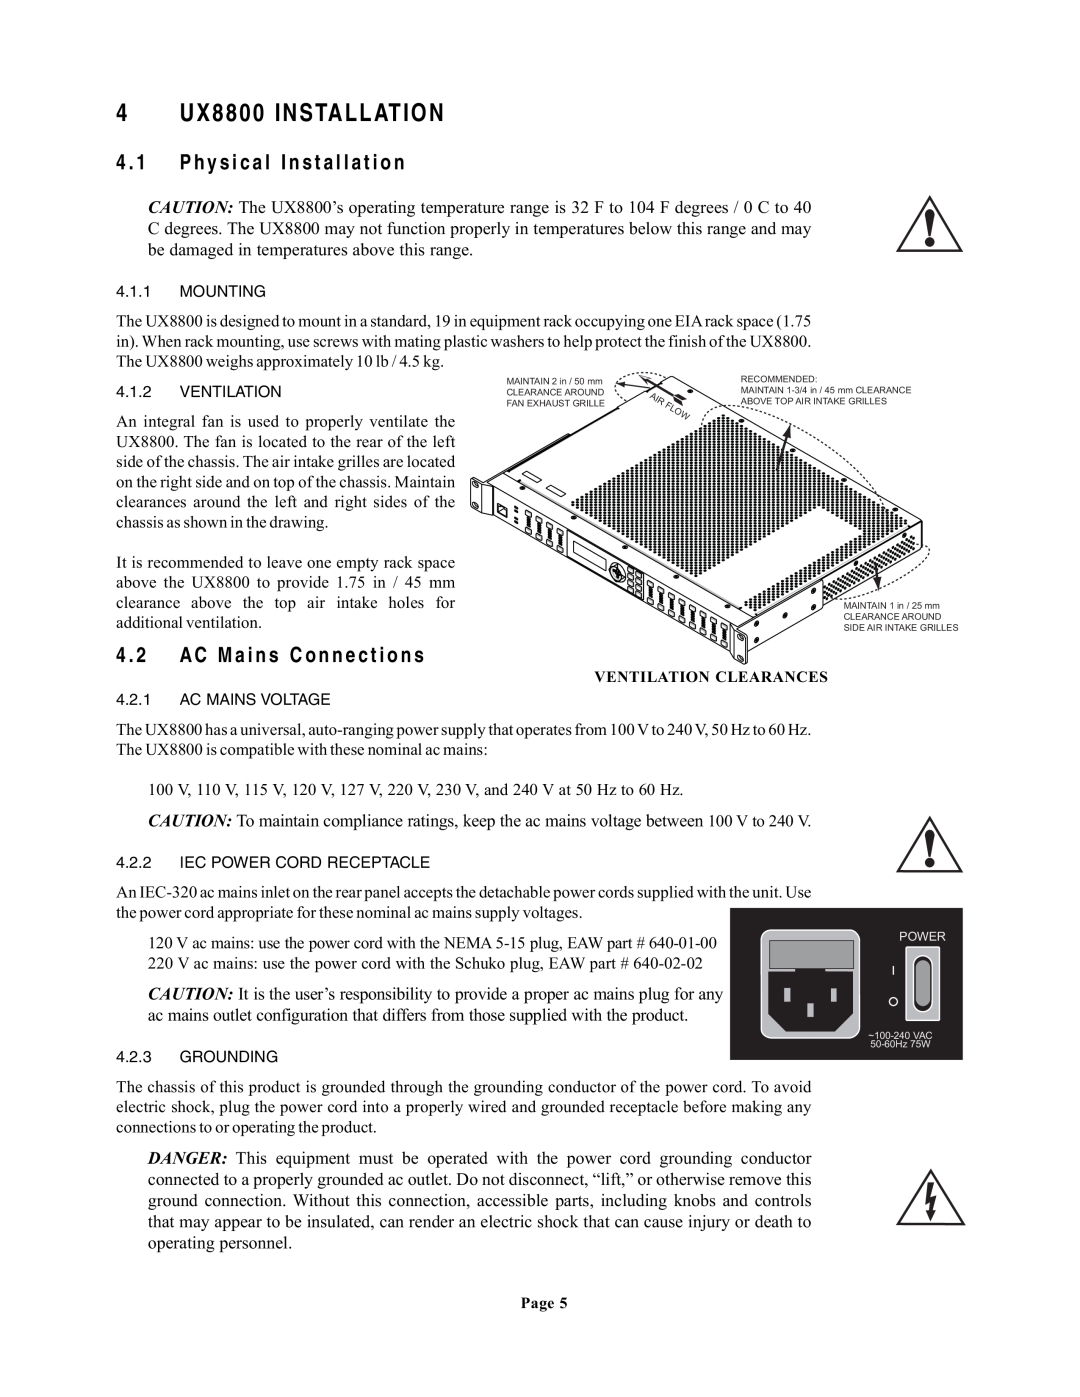 EAW owner manual 4 UX8800 INSTALLATION, 4 . 1 Physical Installation, 4 . 2 AC Mains Connections 